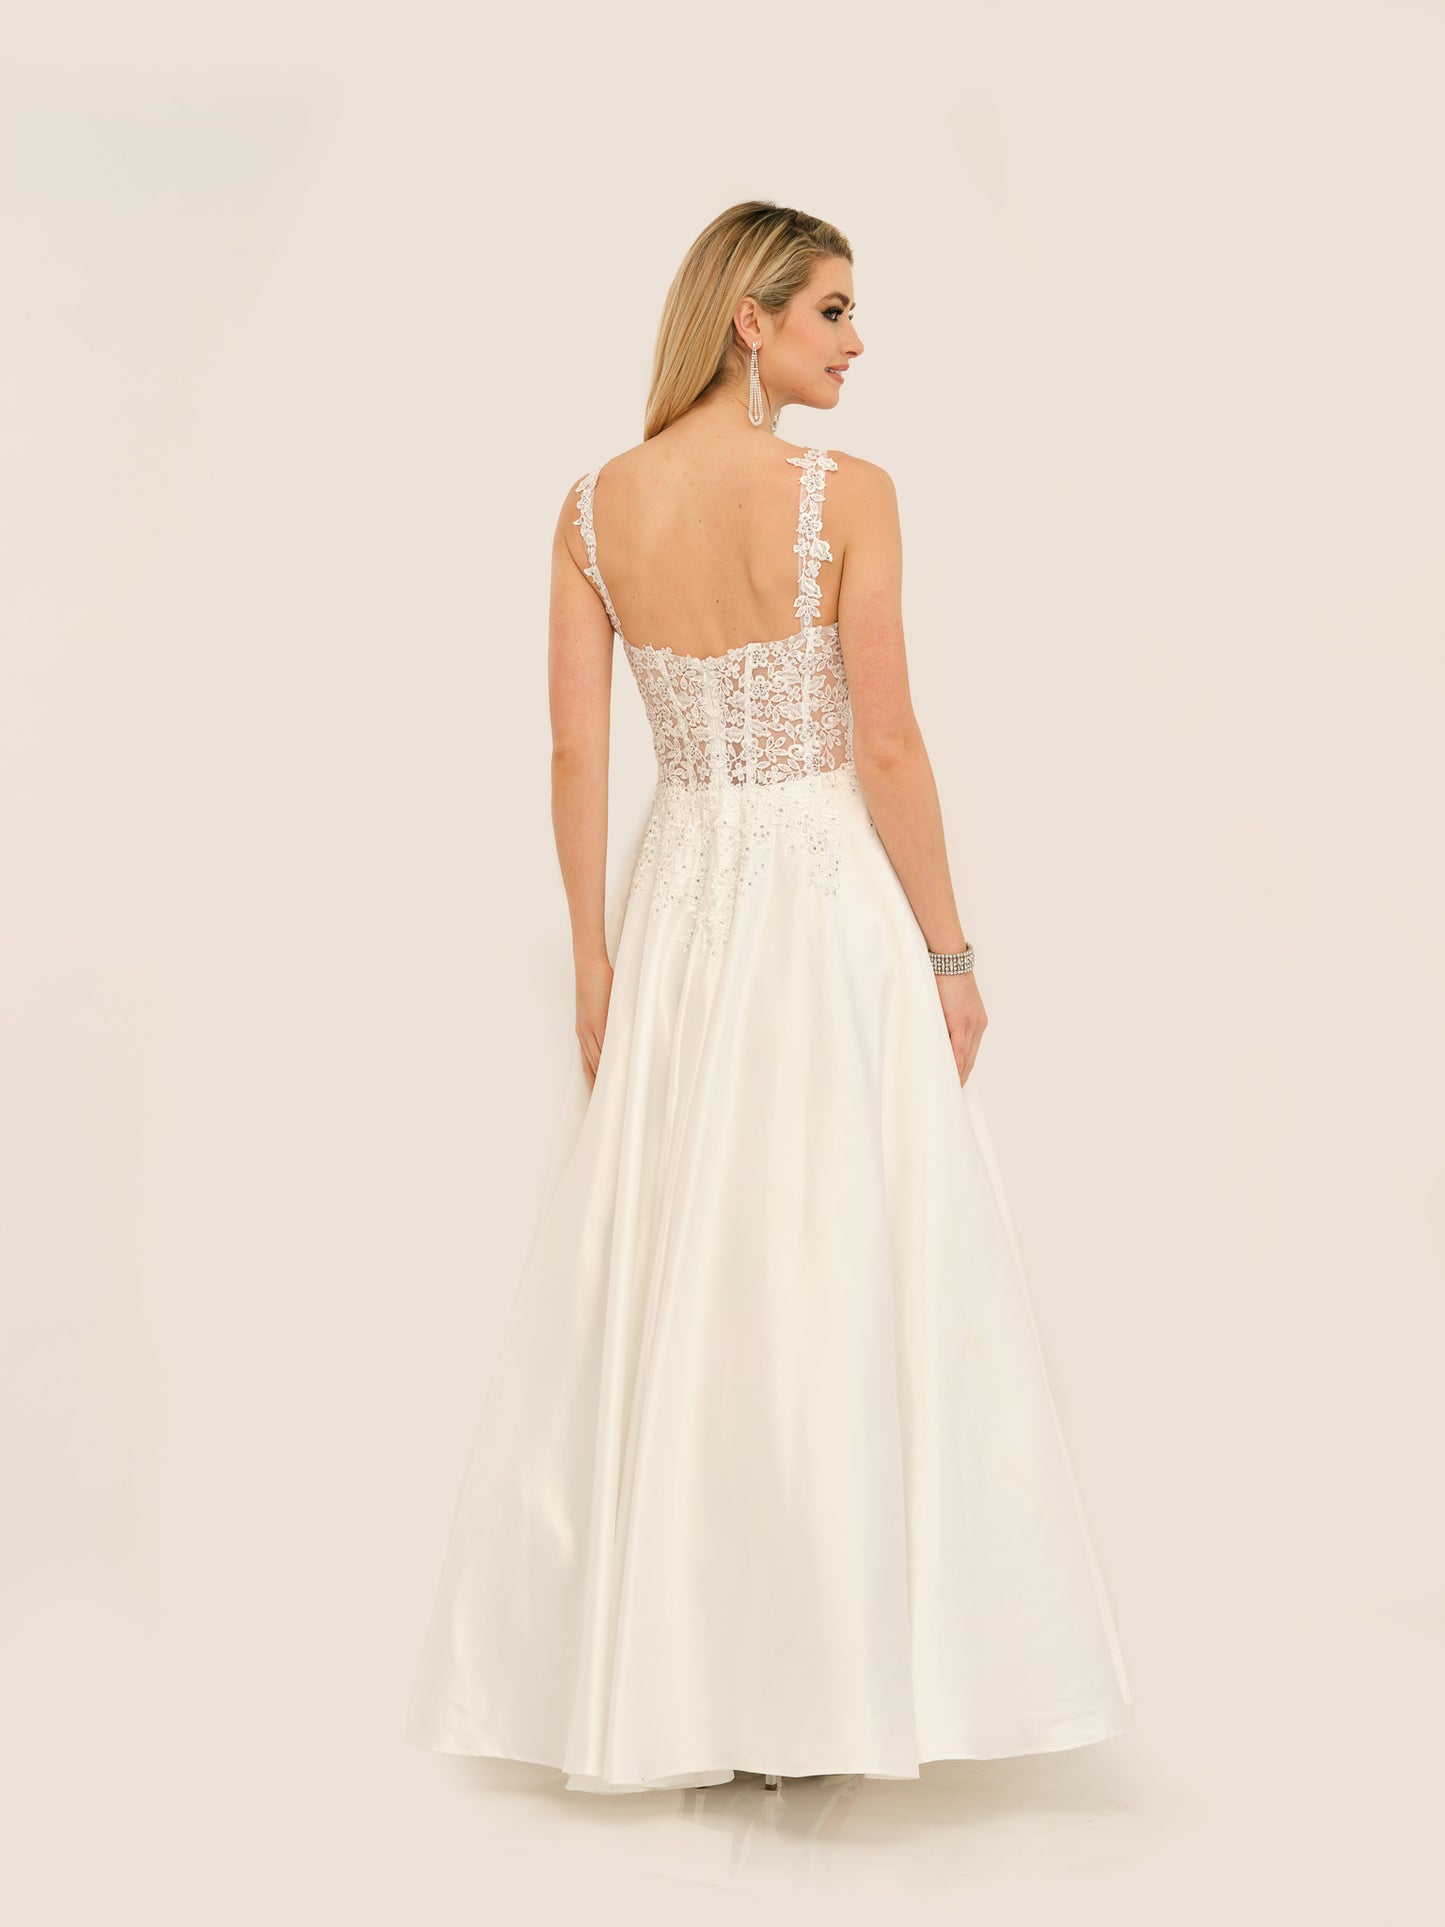 BEJEWELED TRANSPARENT FLORAL BODICE A-LINE WEDDING GOWN